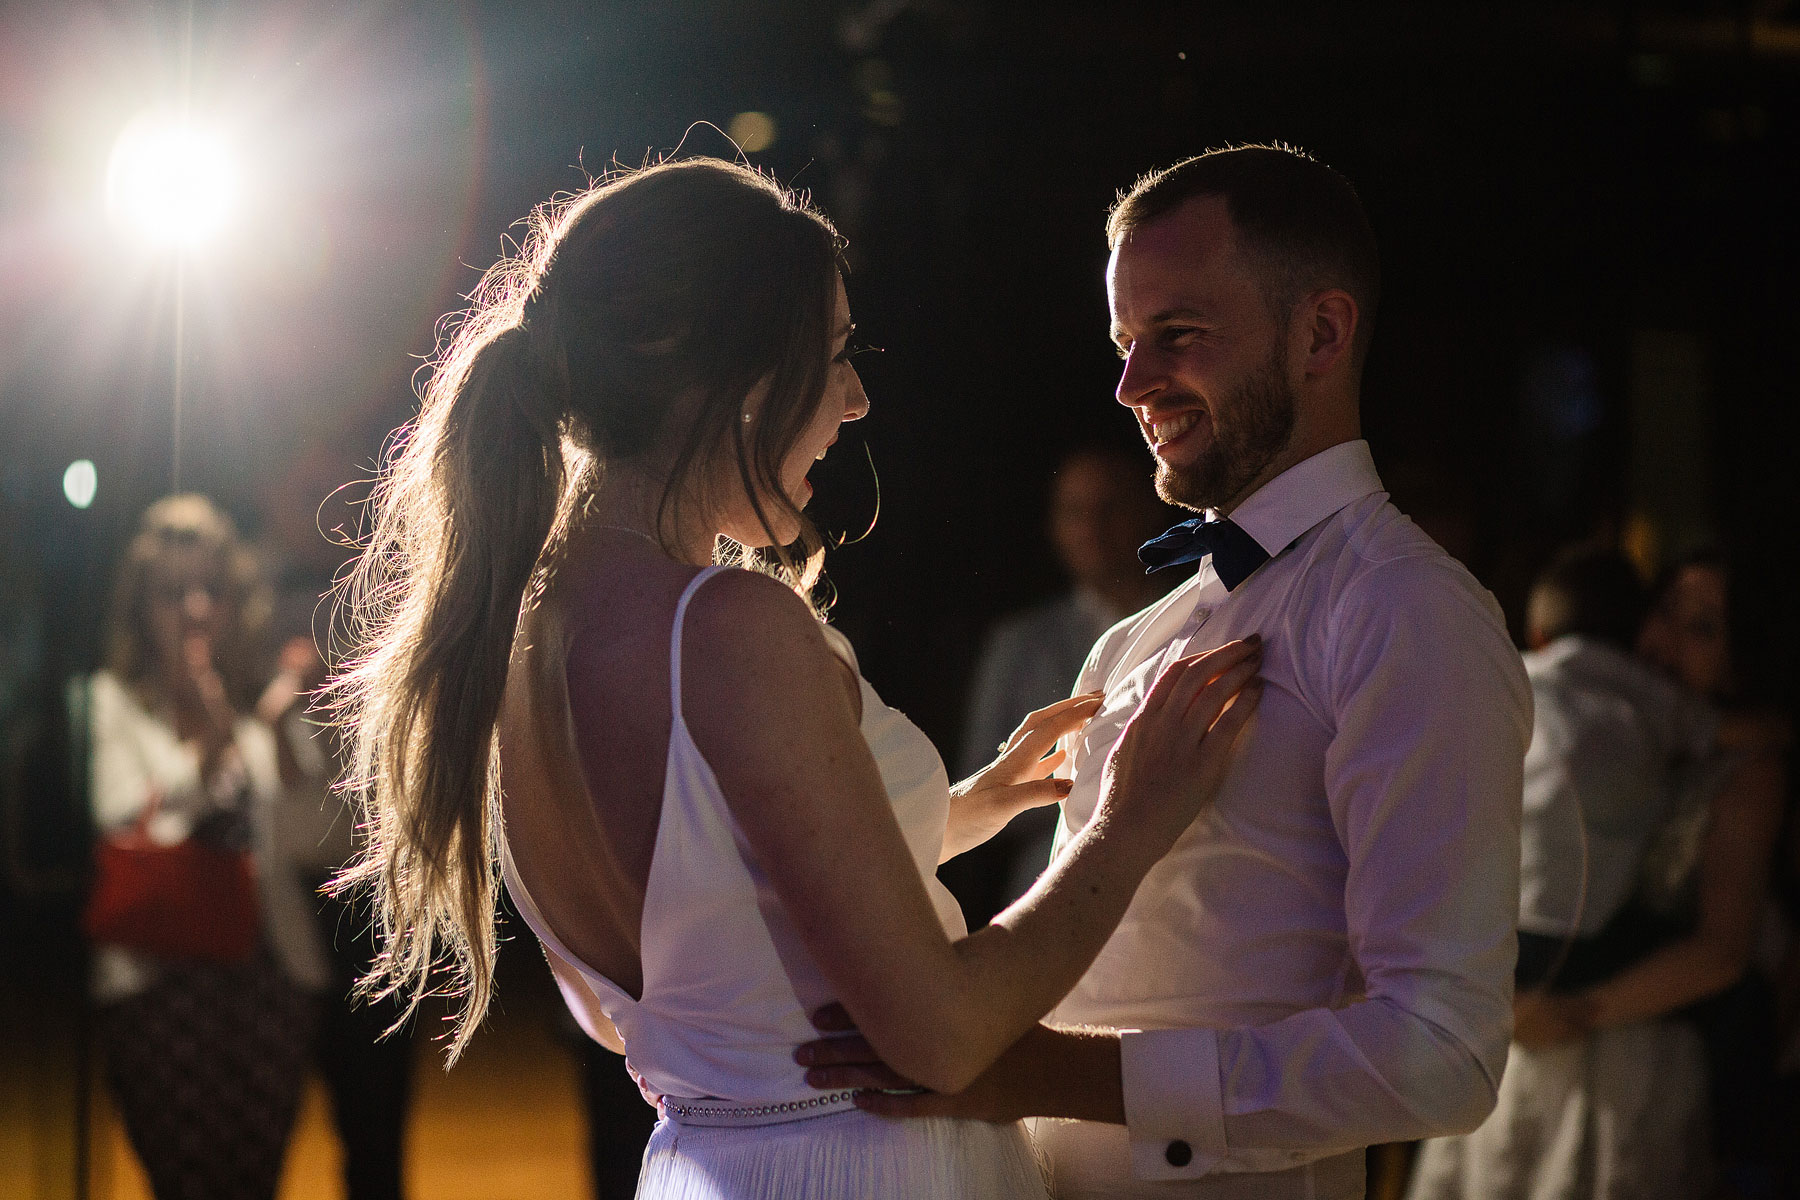 first dance in great light for an informal yorkshire wedding